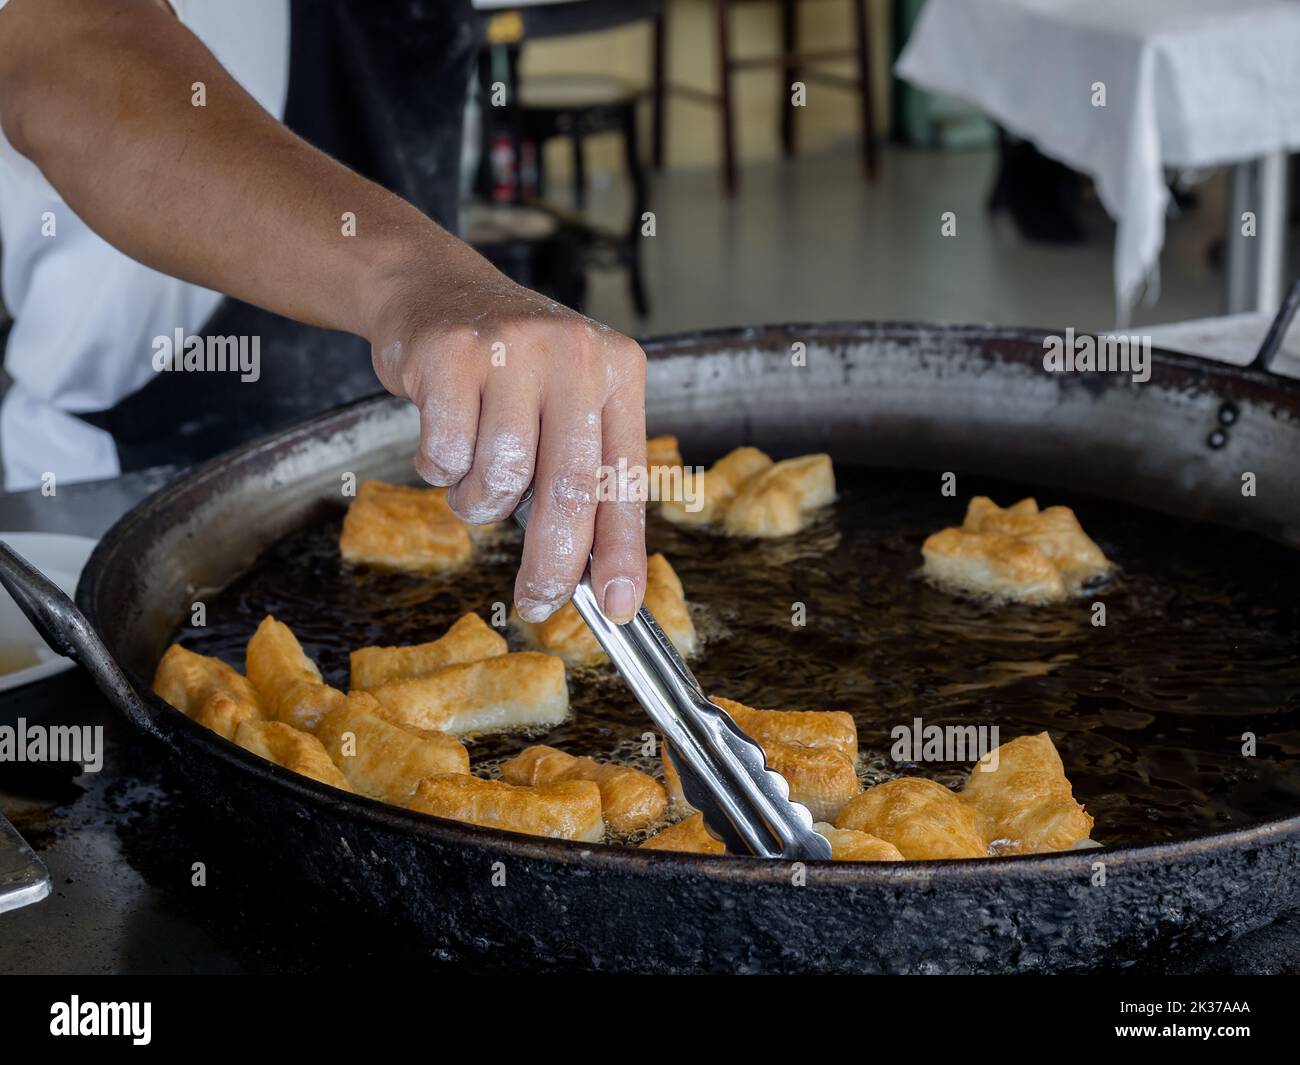 Deep-fried dough sticks or Patongko in Thai, Asian famous street food in Thailand, Chinese doughnuts. A traditional yellow crispy snack made from flou Stock Photo